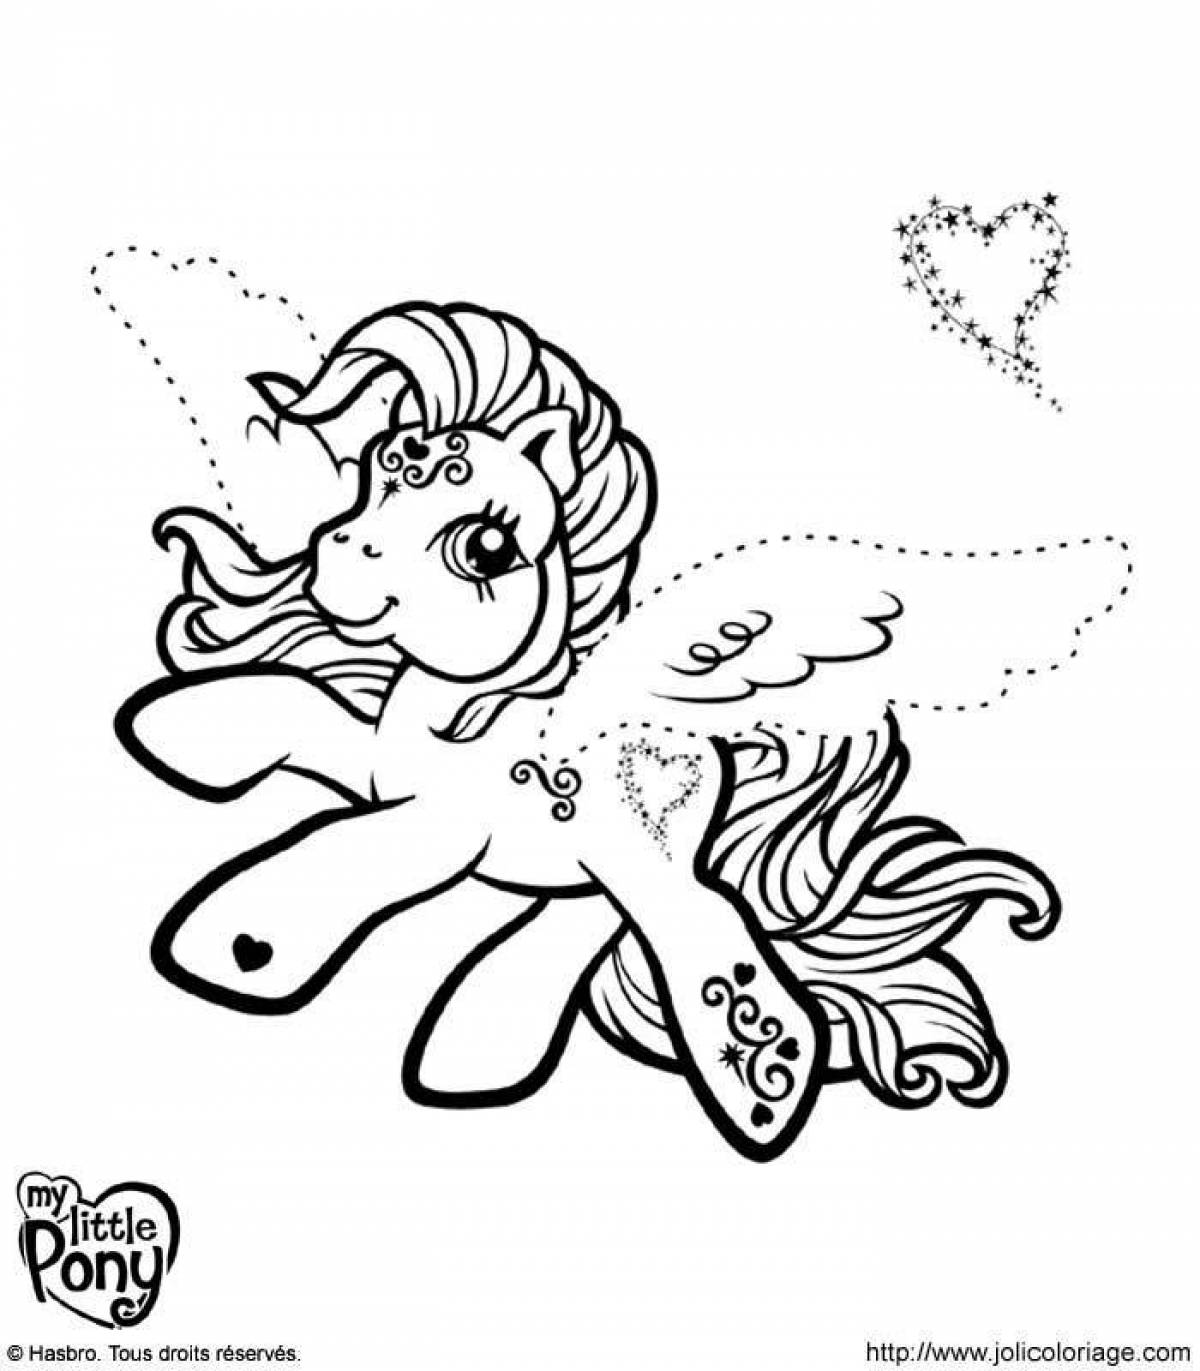 Amazing new generation pony coloring page